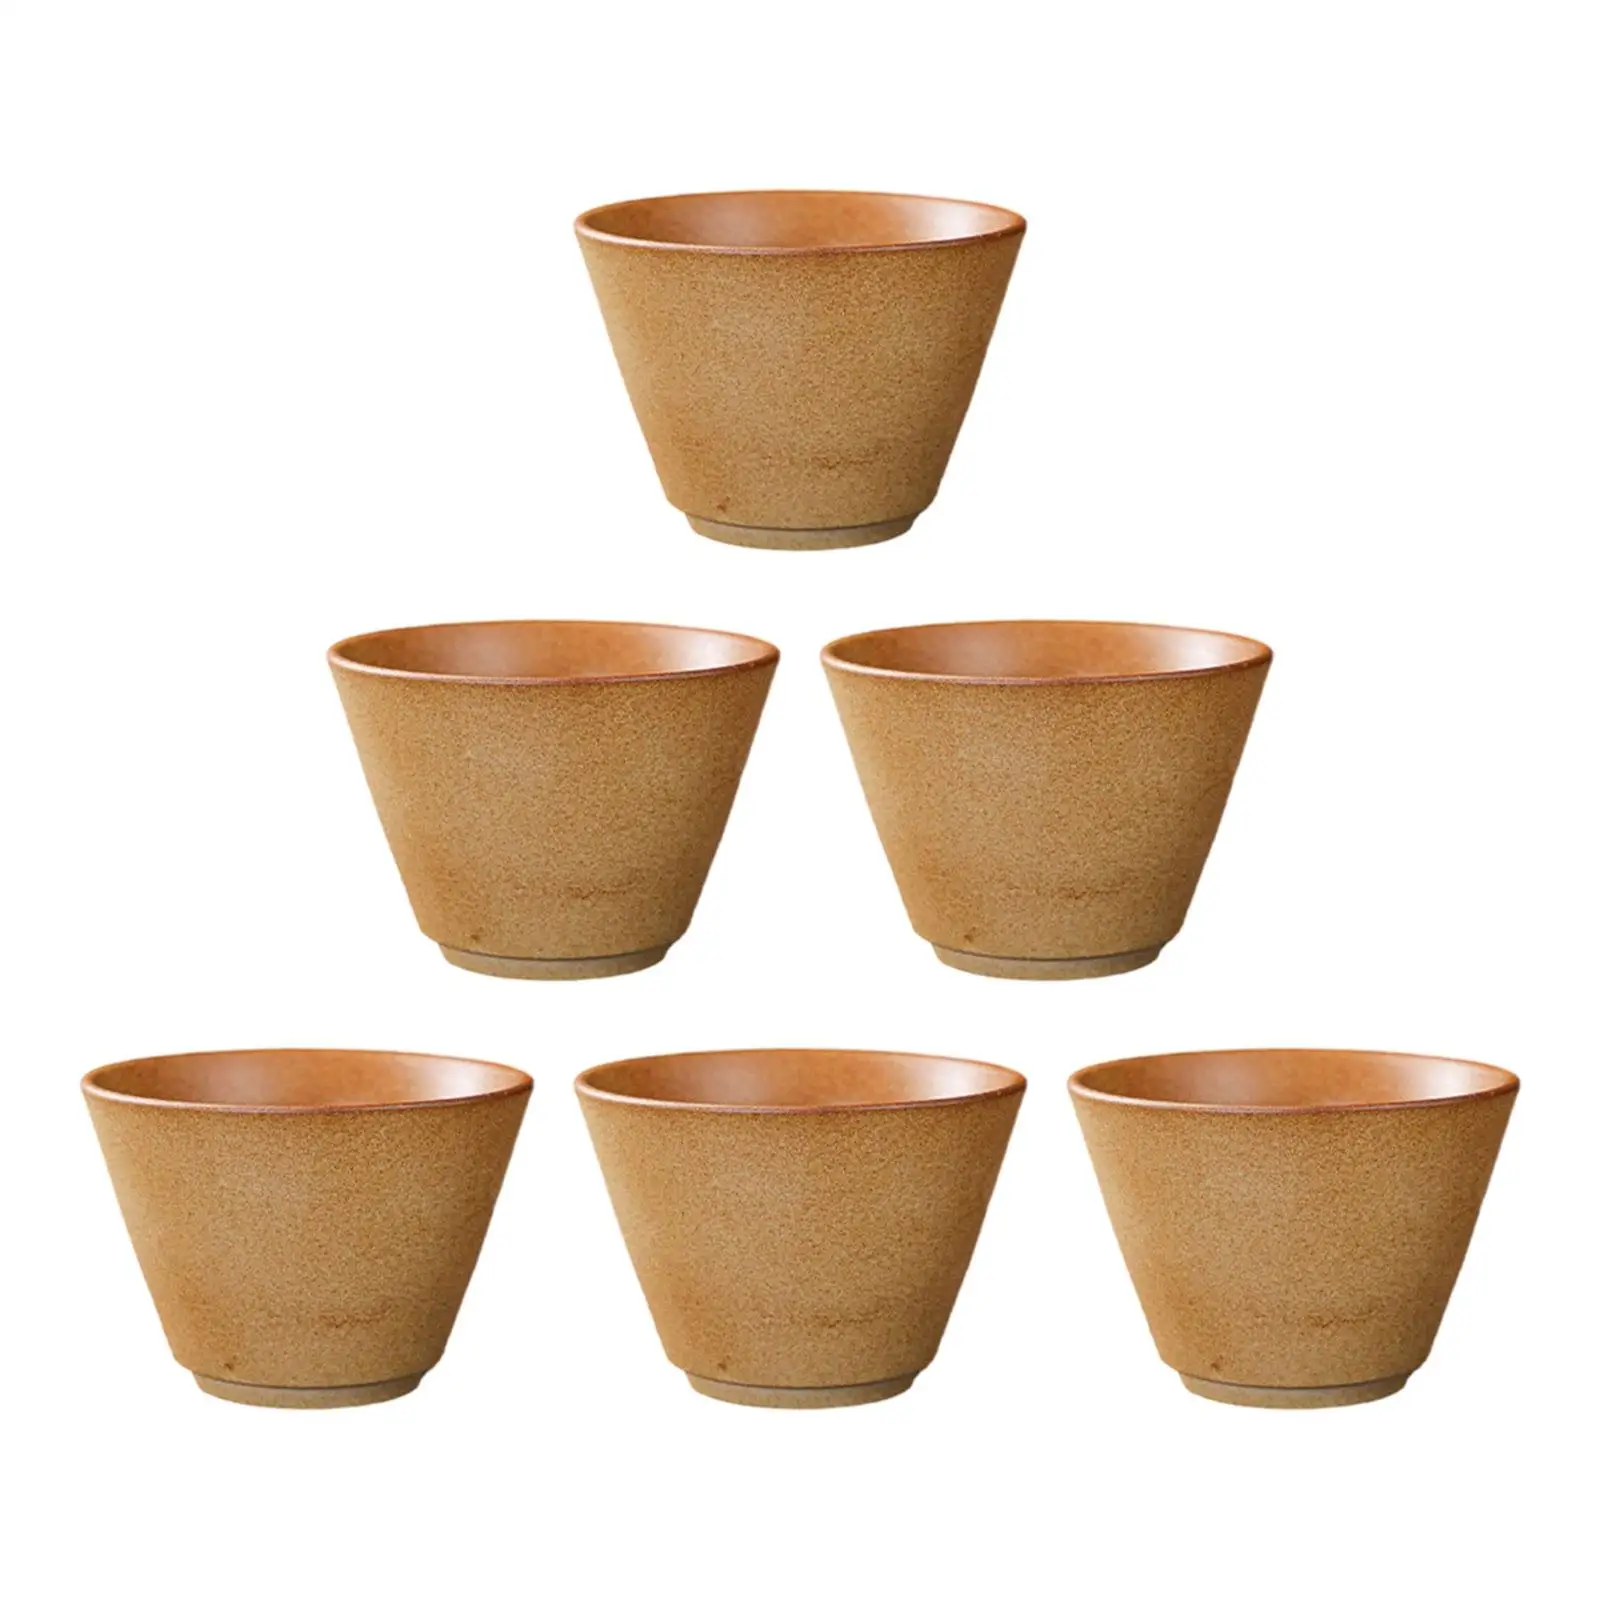 6 Pieces Chinese Porcelain Tea Cup Traditional Handmade Sake Cups Mug for Home Travel Office Tea Ceremony Party Adults Men Women